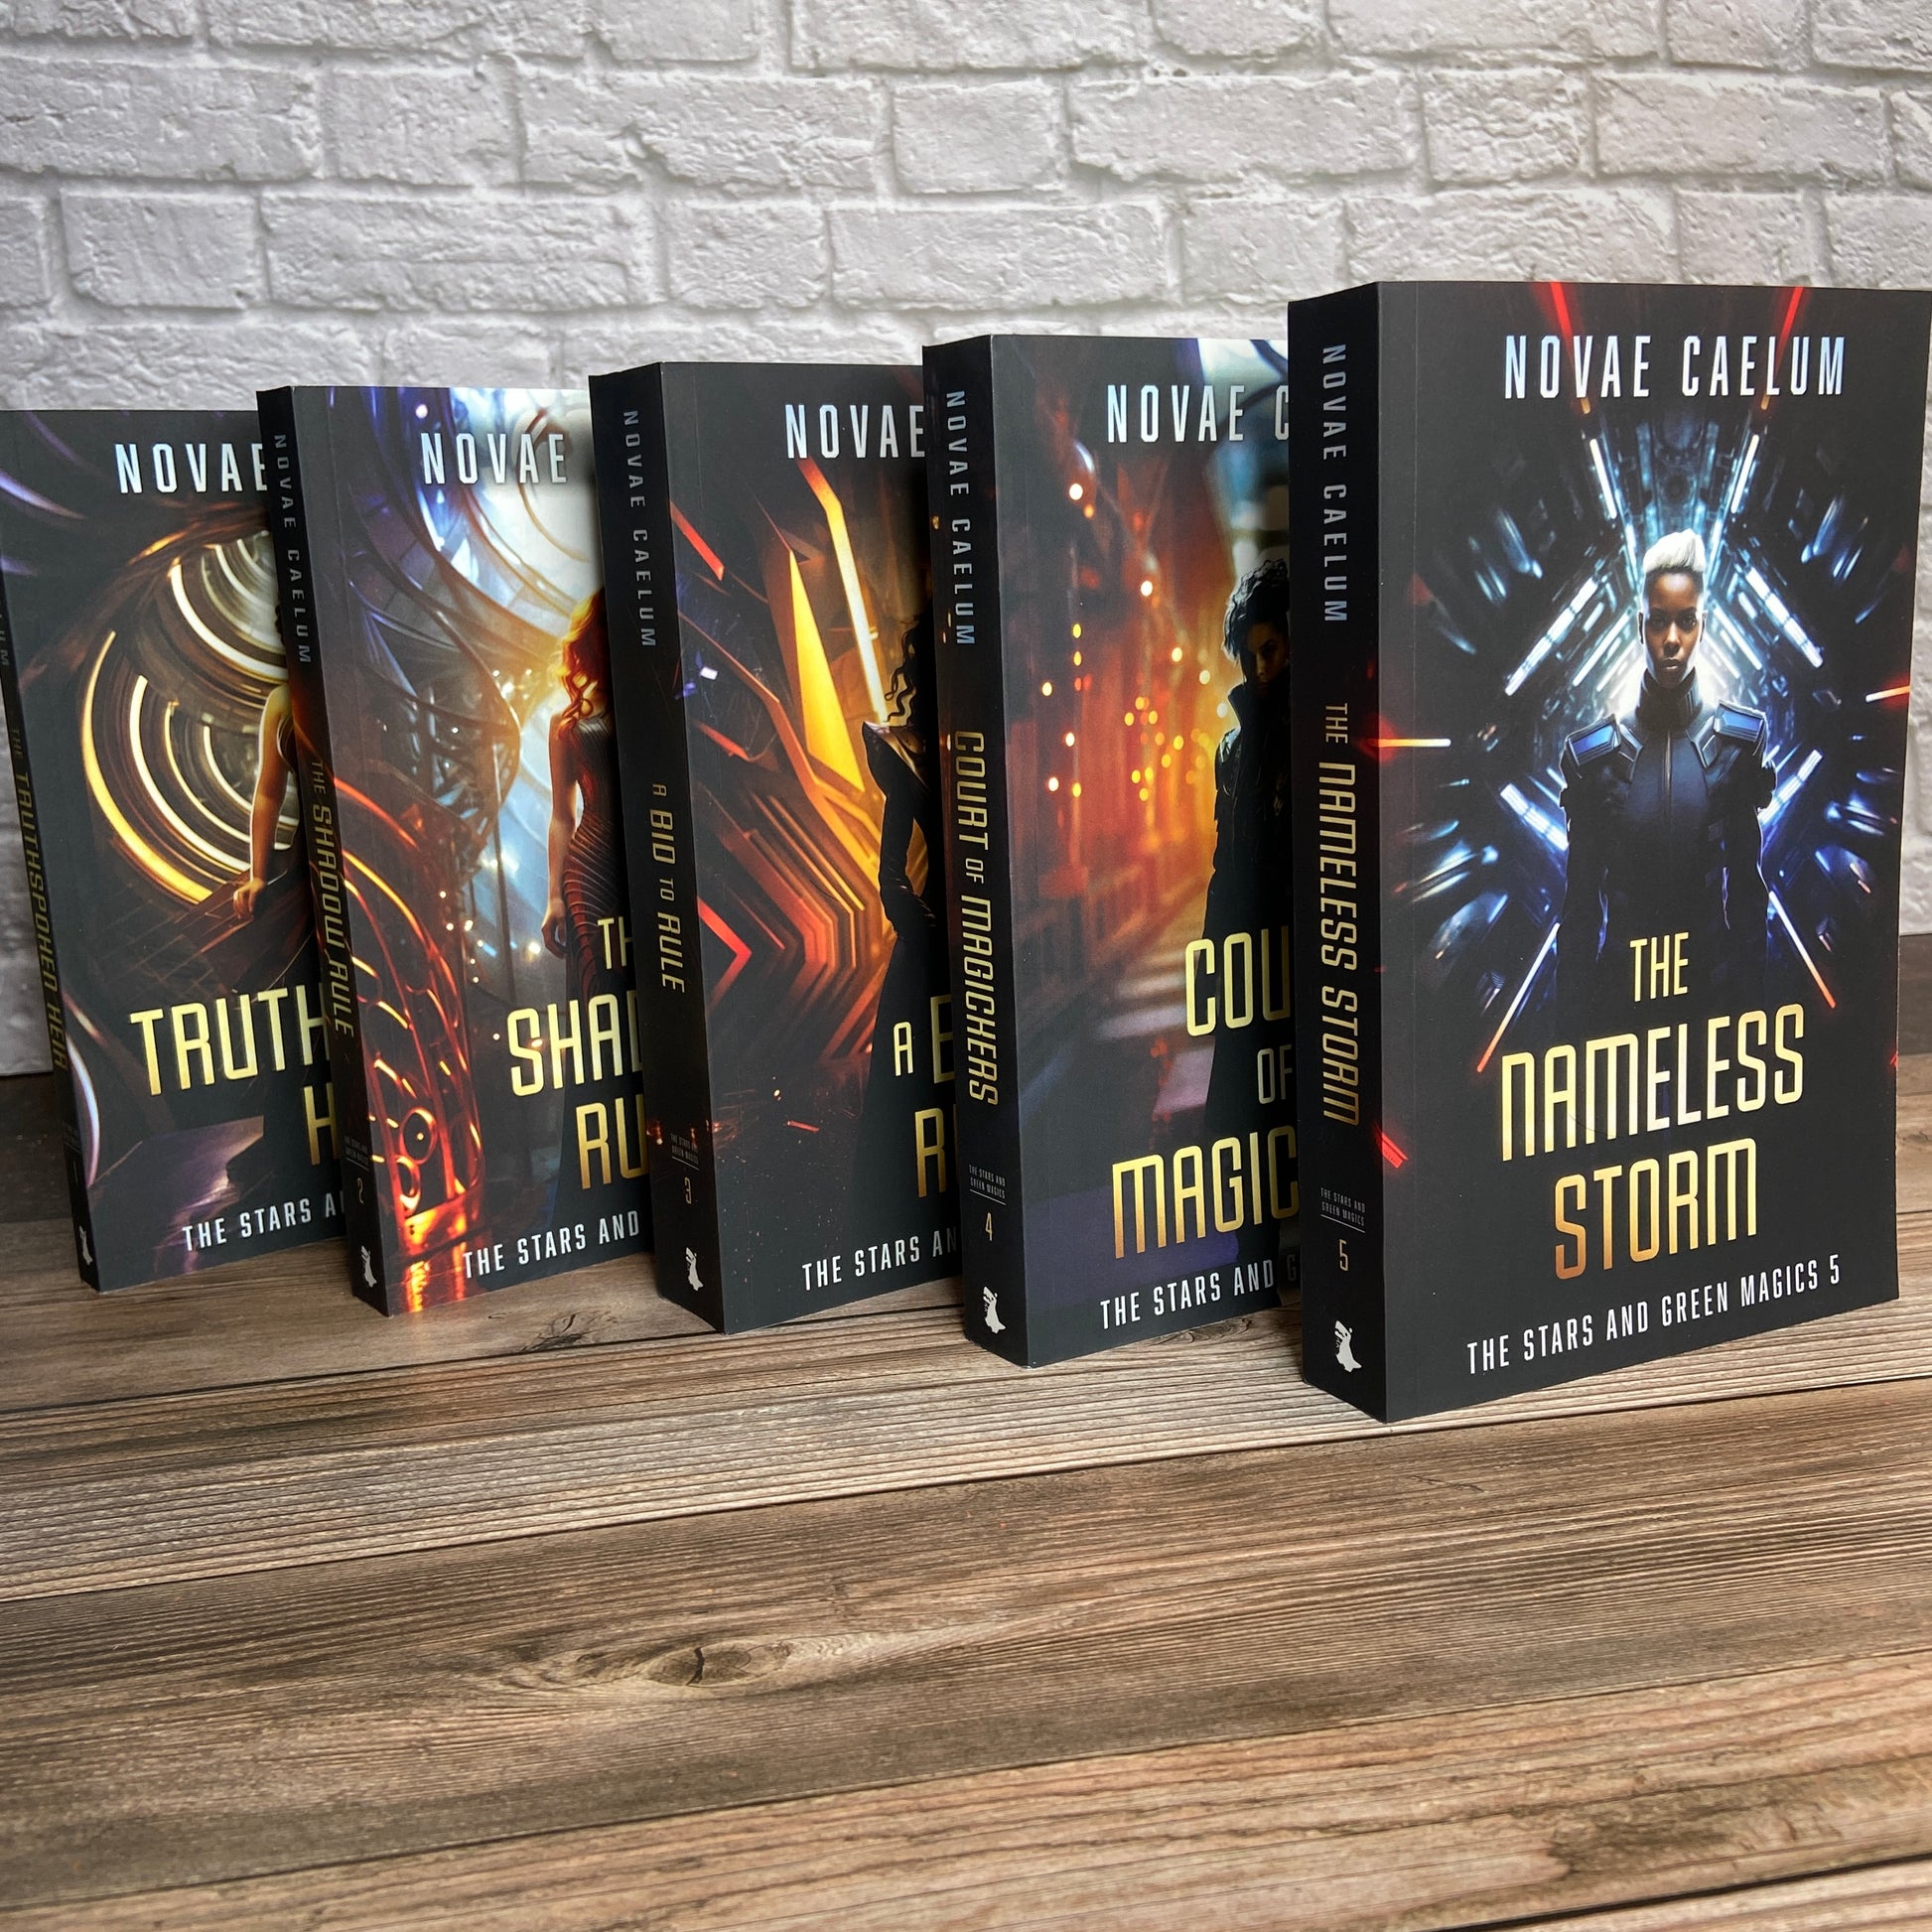 Set of 5 paperbacks (Books 1-5) from "The Stars and Green Magics" series by Novae Caelum standing in a staggered row. This collection is part of the Paperback Deluxe Swag Bundle.